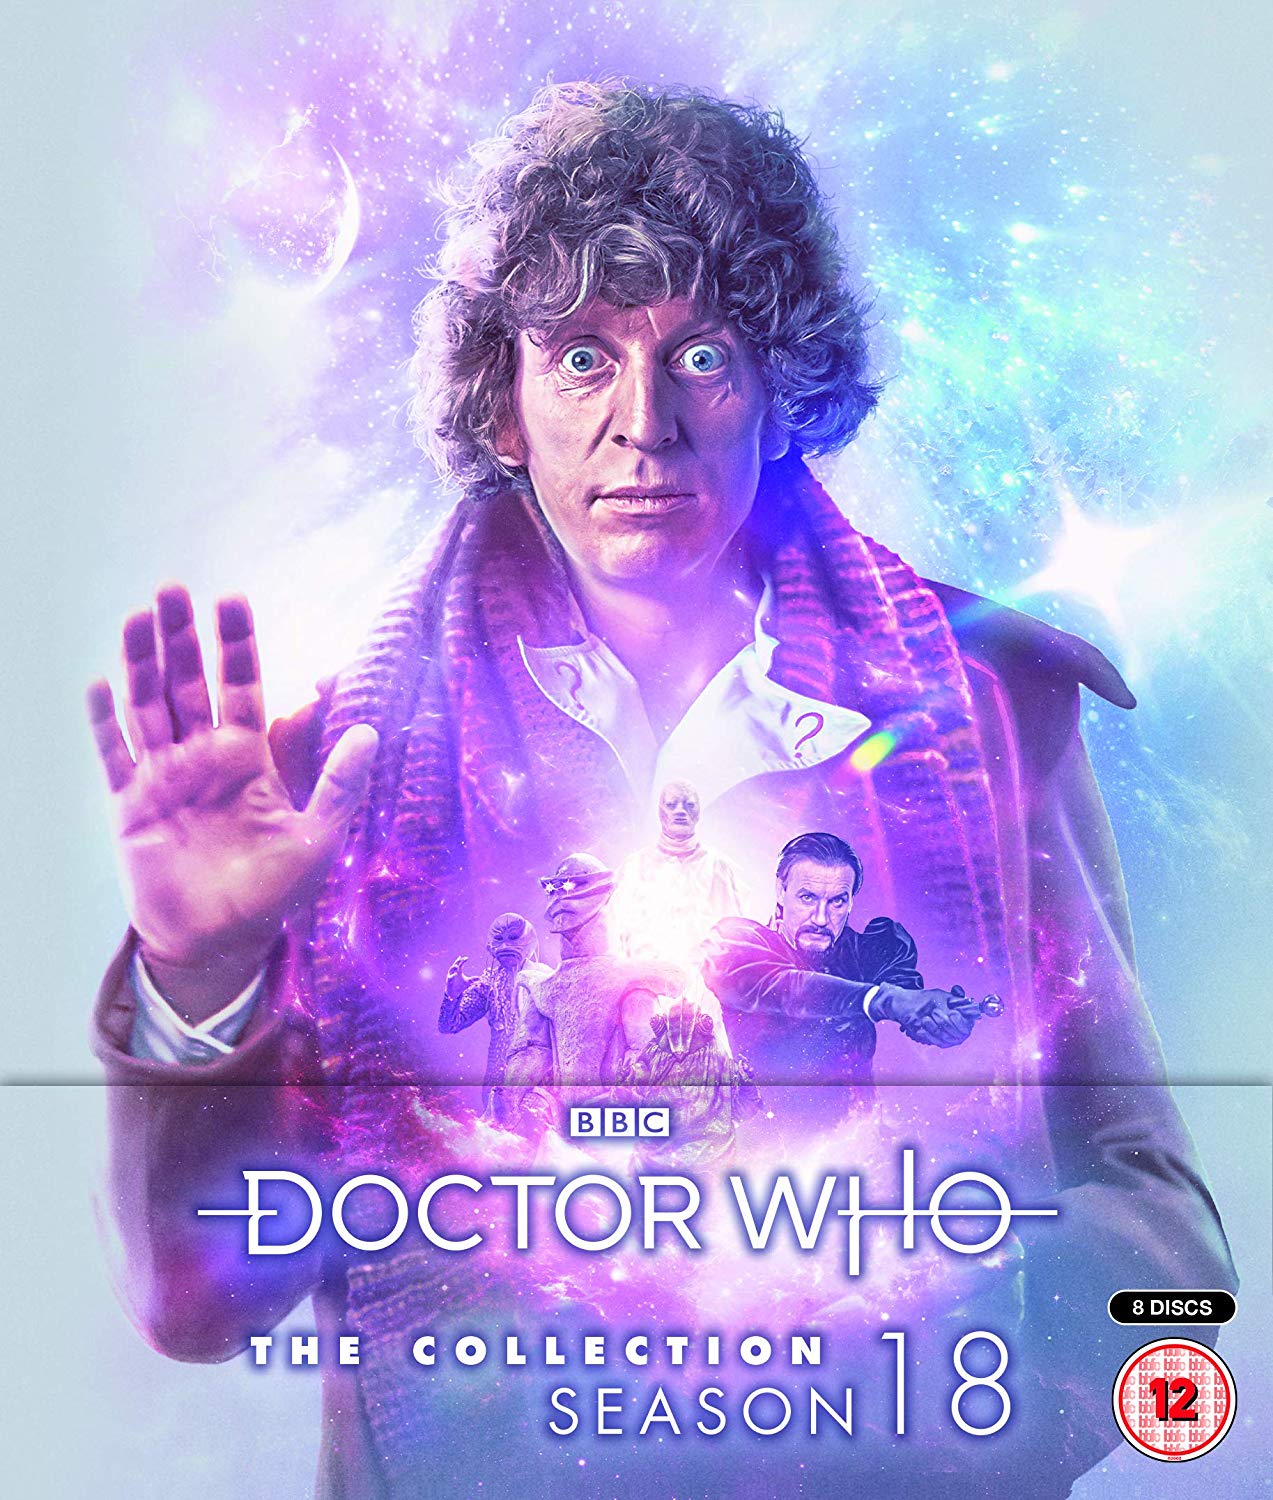 The Collection Season 18 (Bluray) Doctor Who DVD Special Features